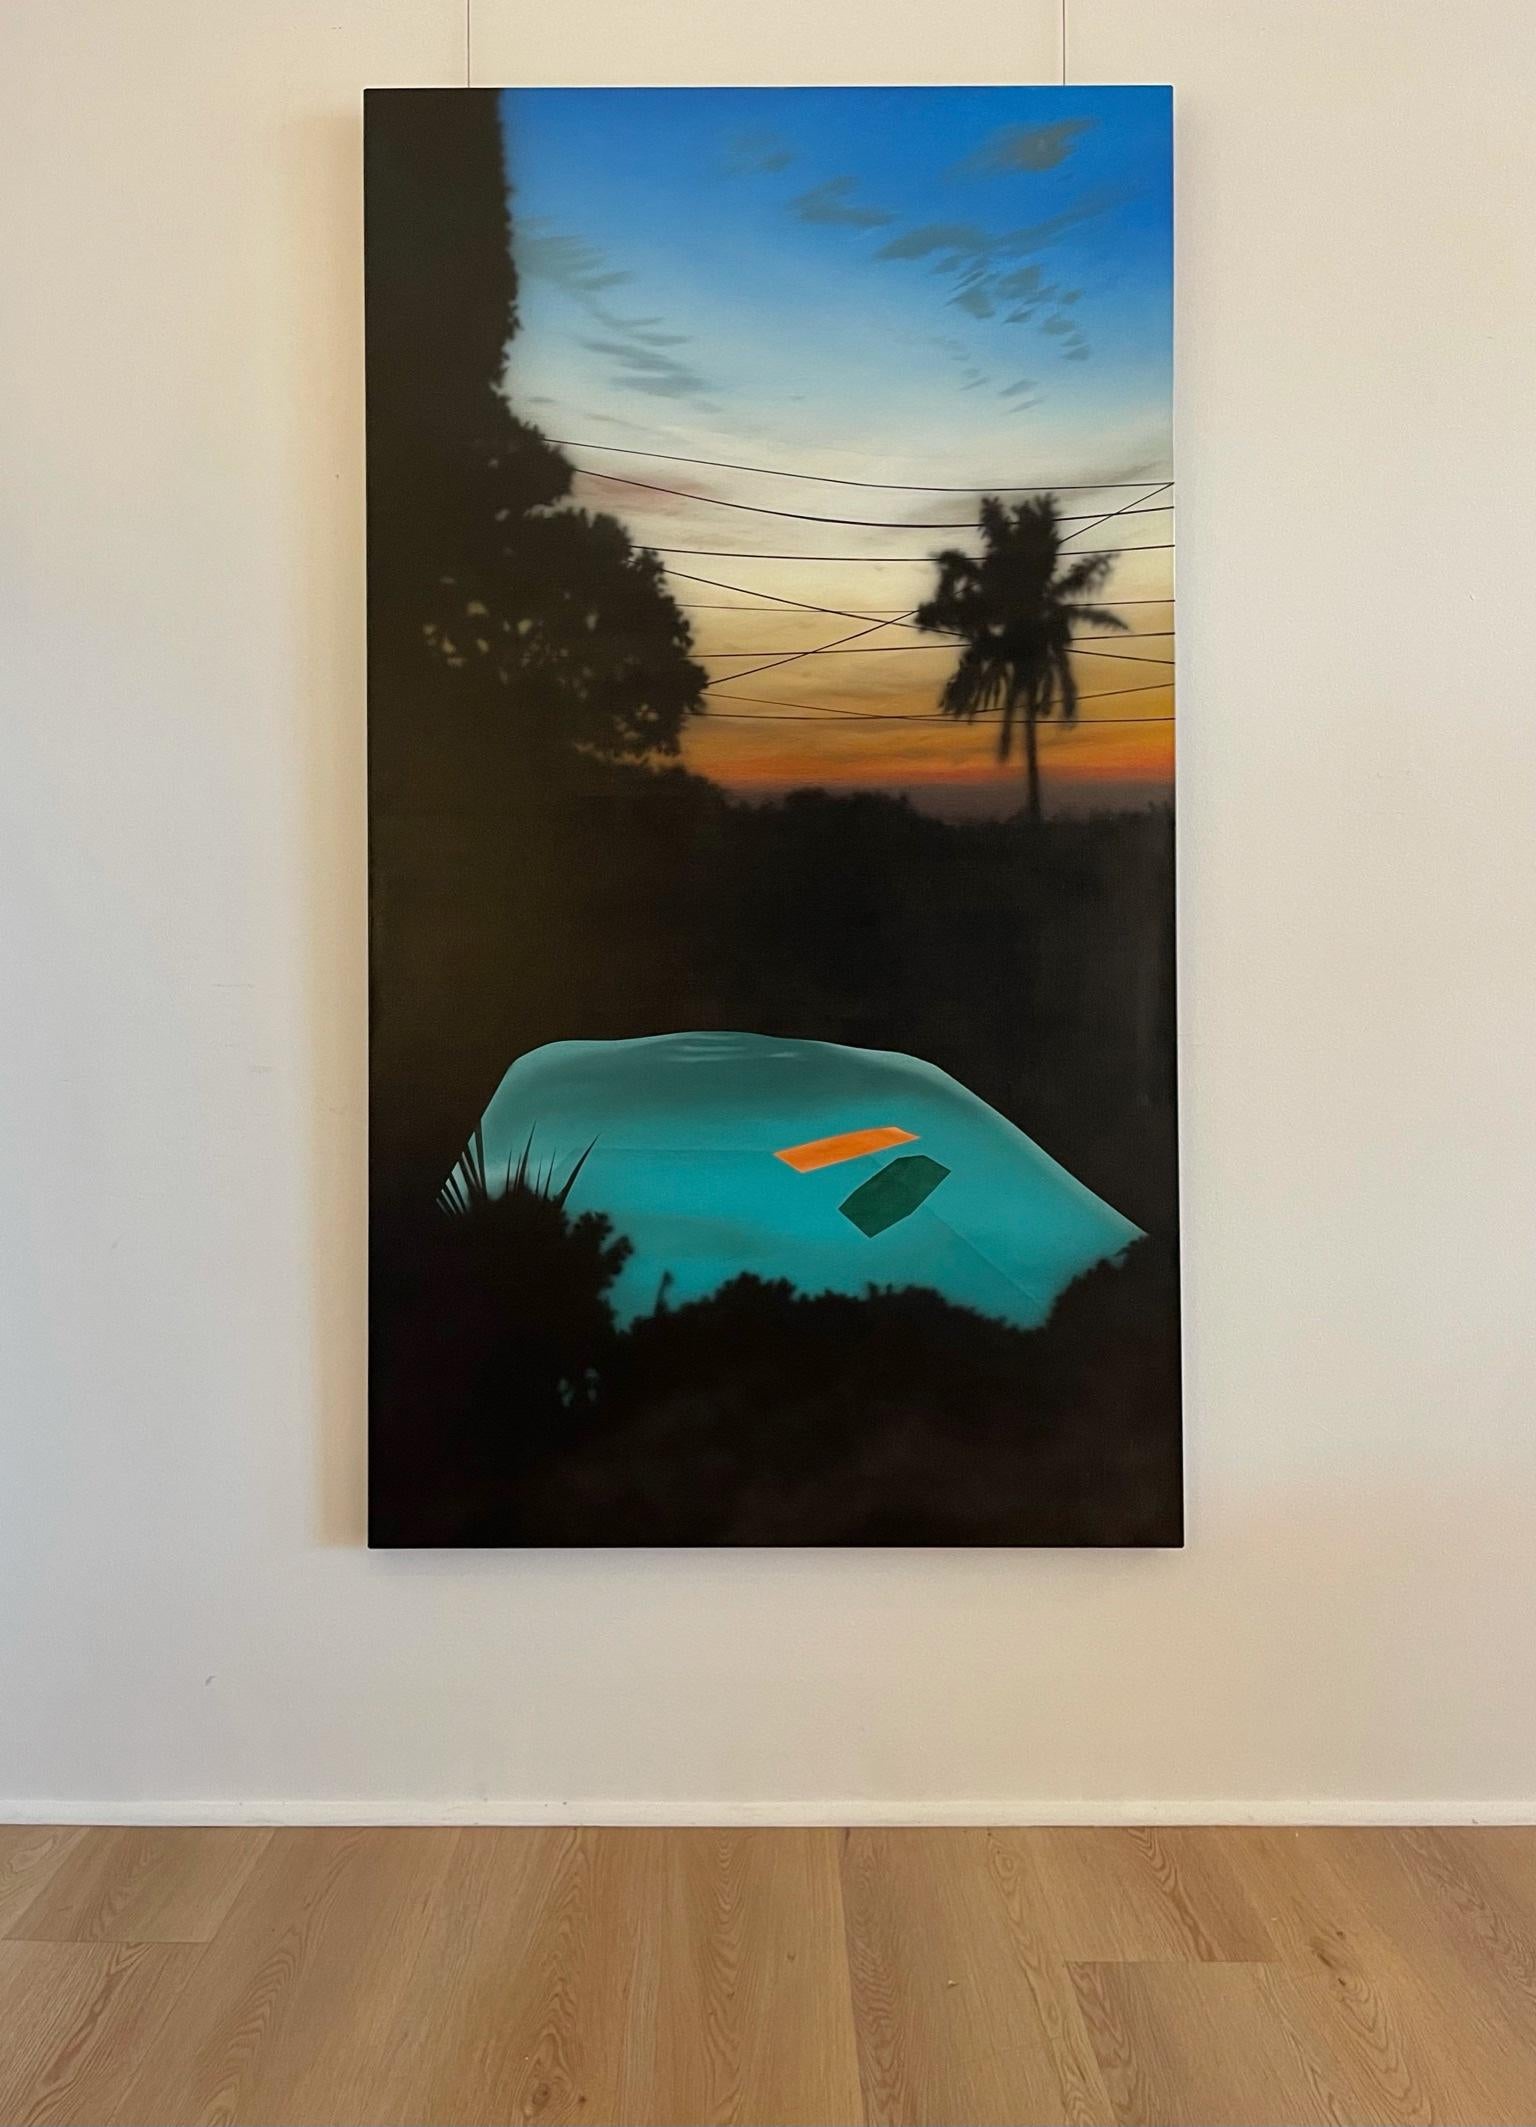 Pool with Orange Float - Painting by Laurence Jones